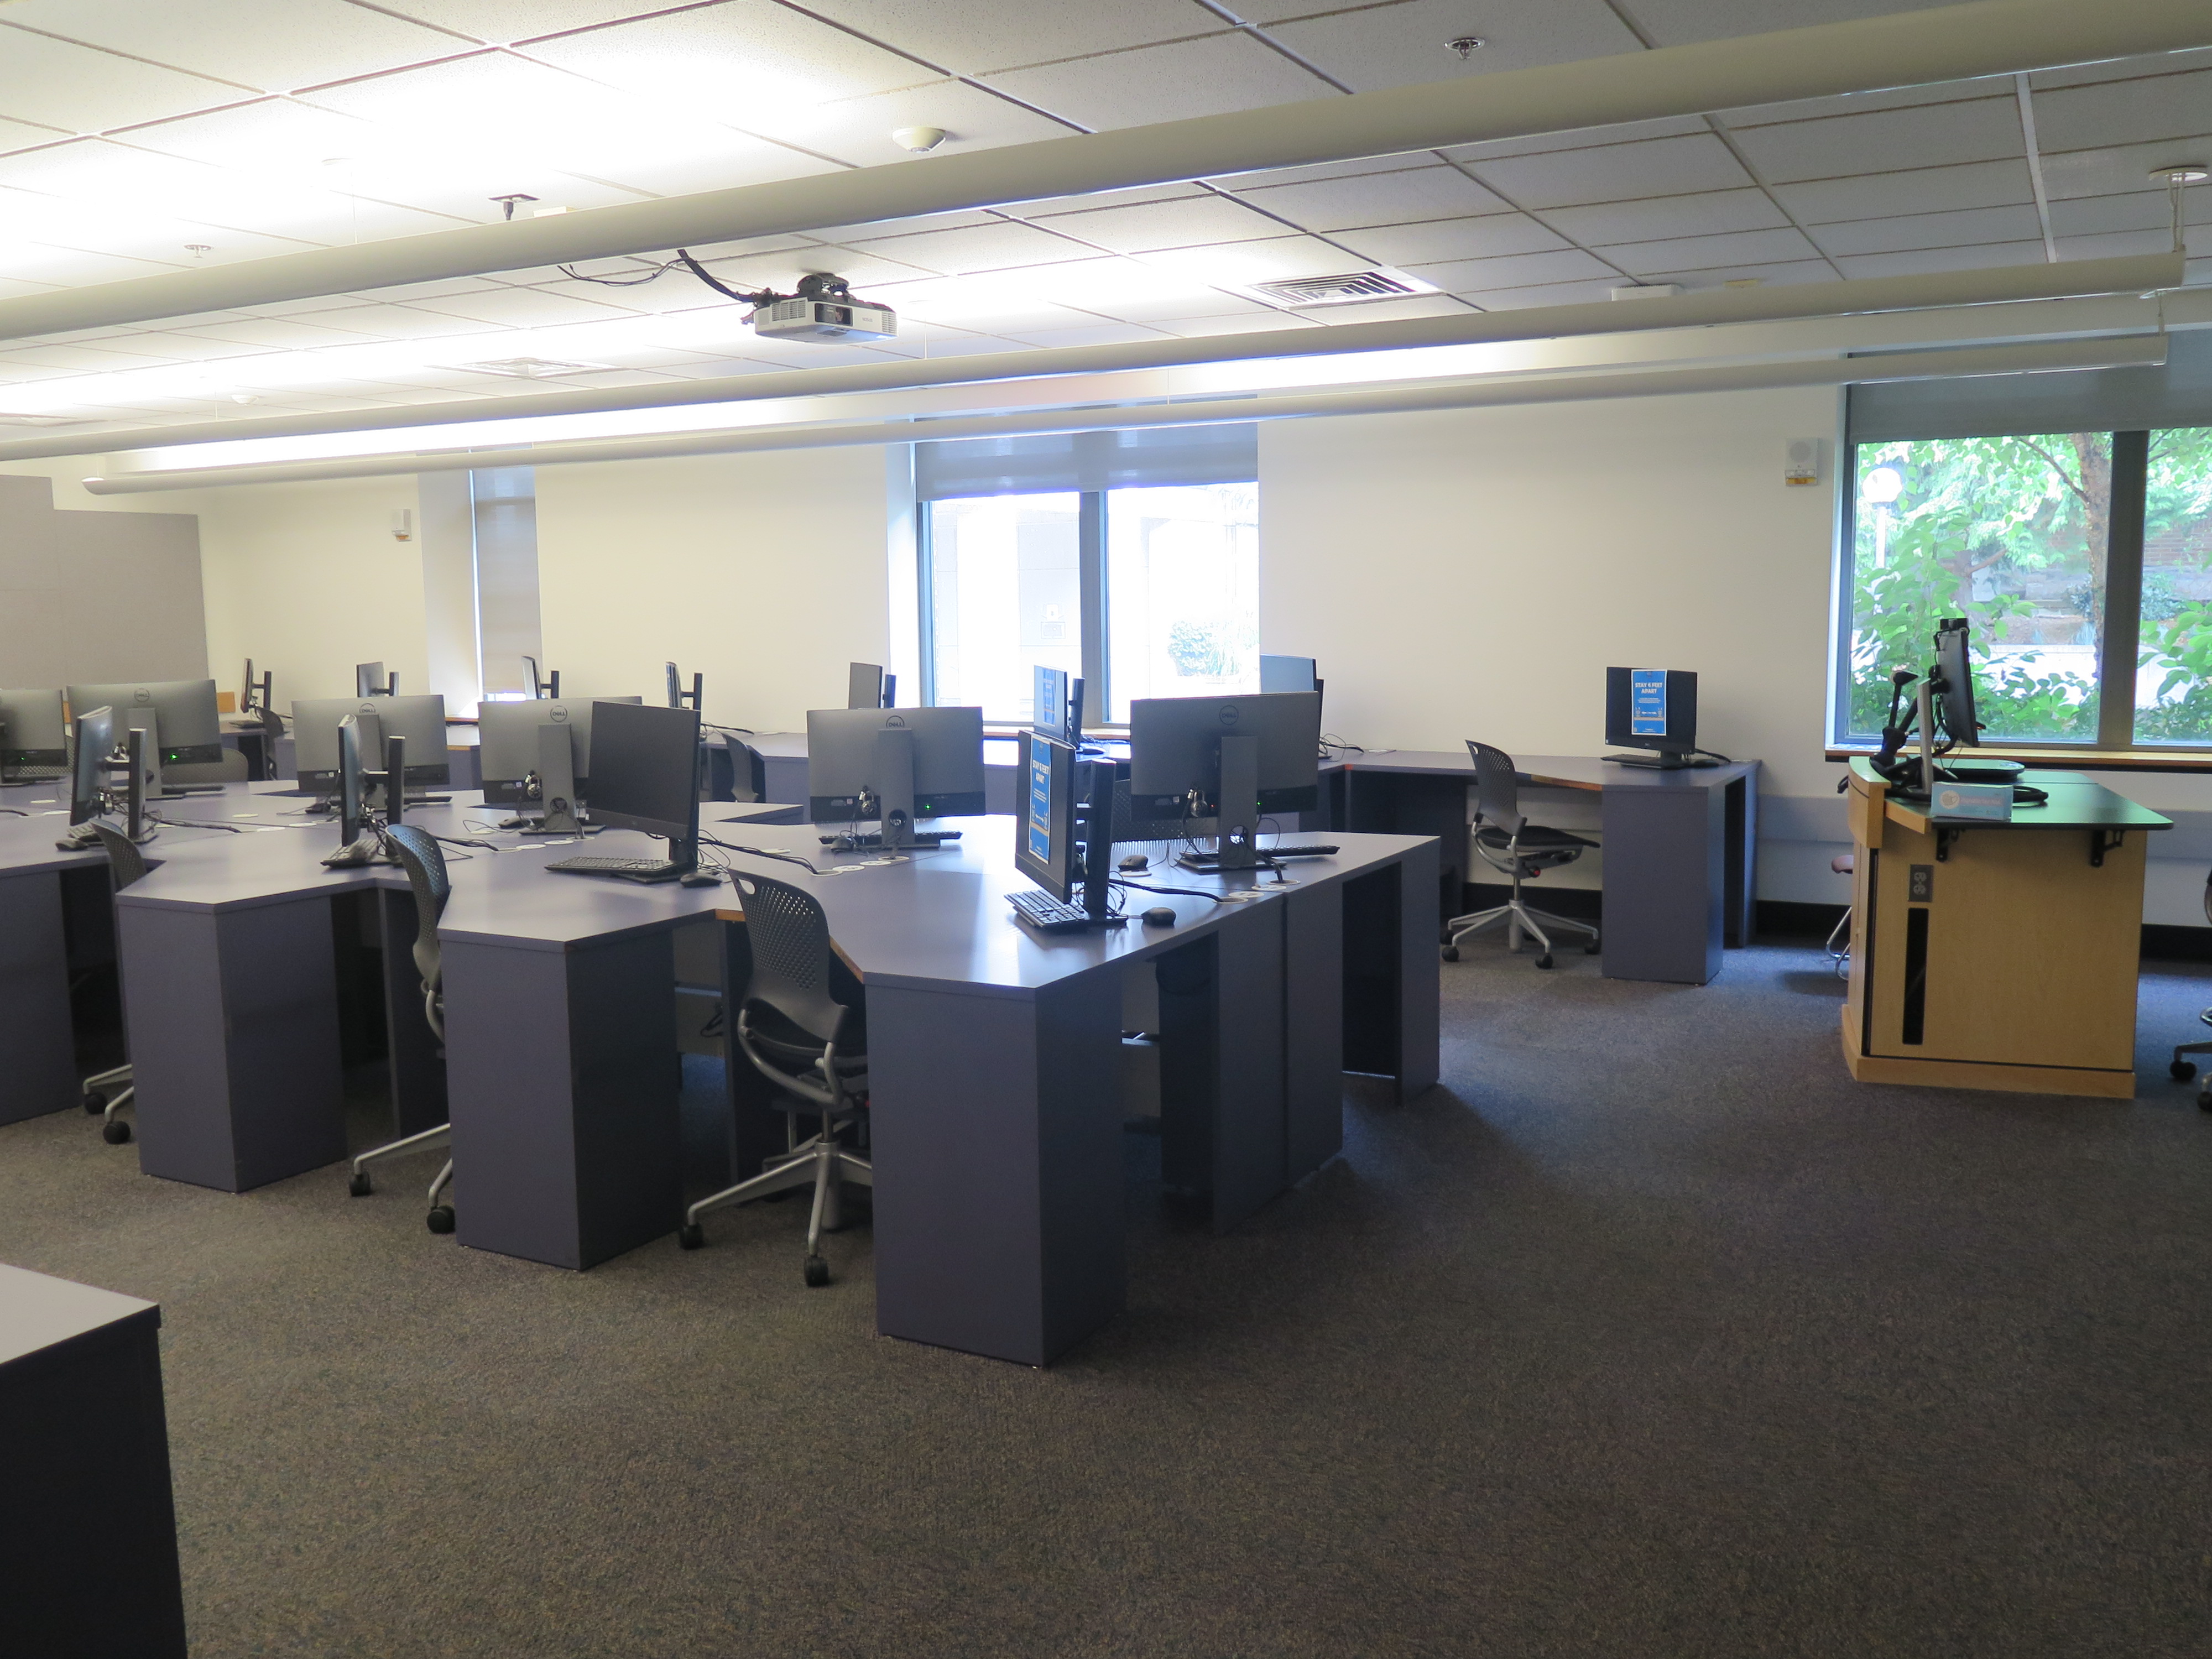 Computer Lab consists of carpet floor, individual computer stations in a row with an aisle in between each row, and Podium and whiteboard located at the front of the room.